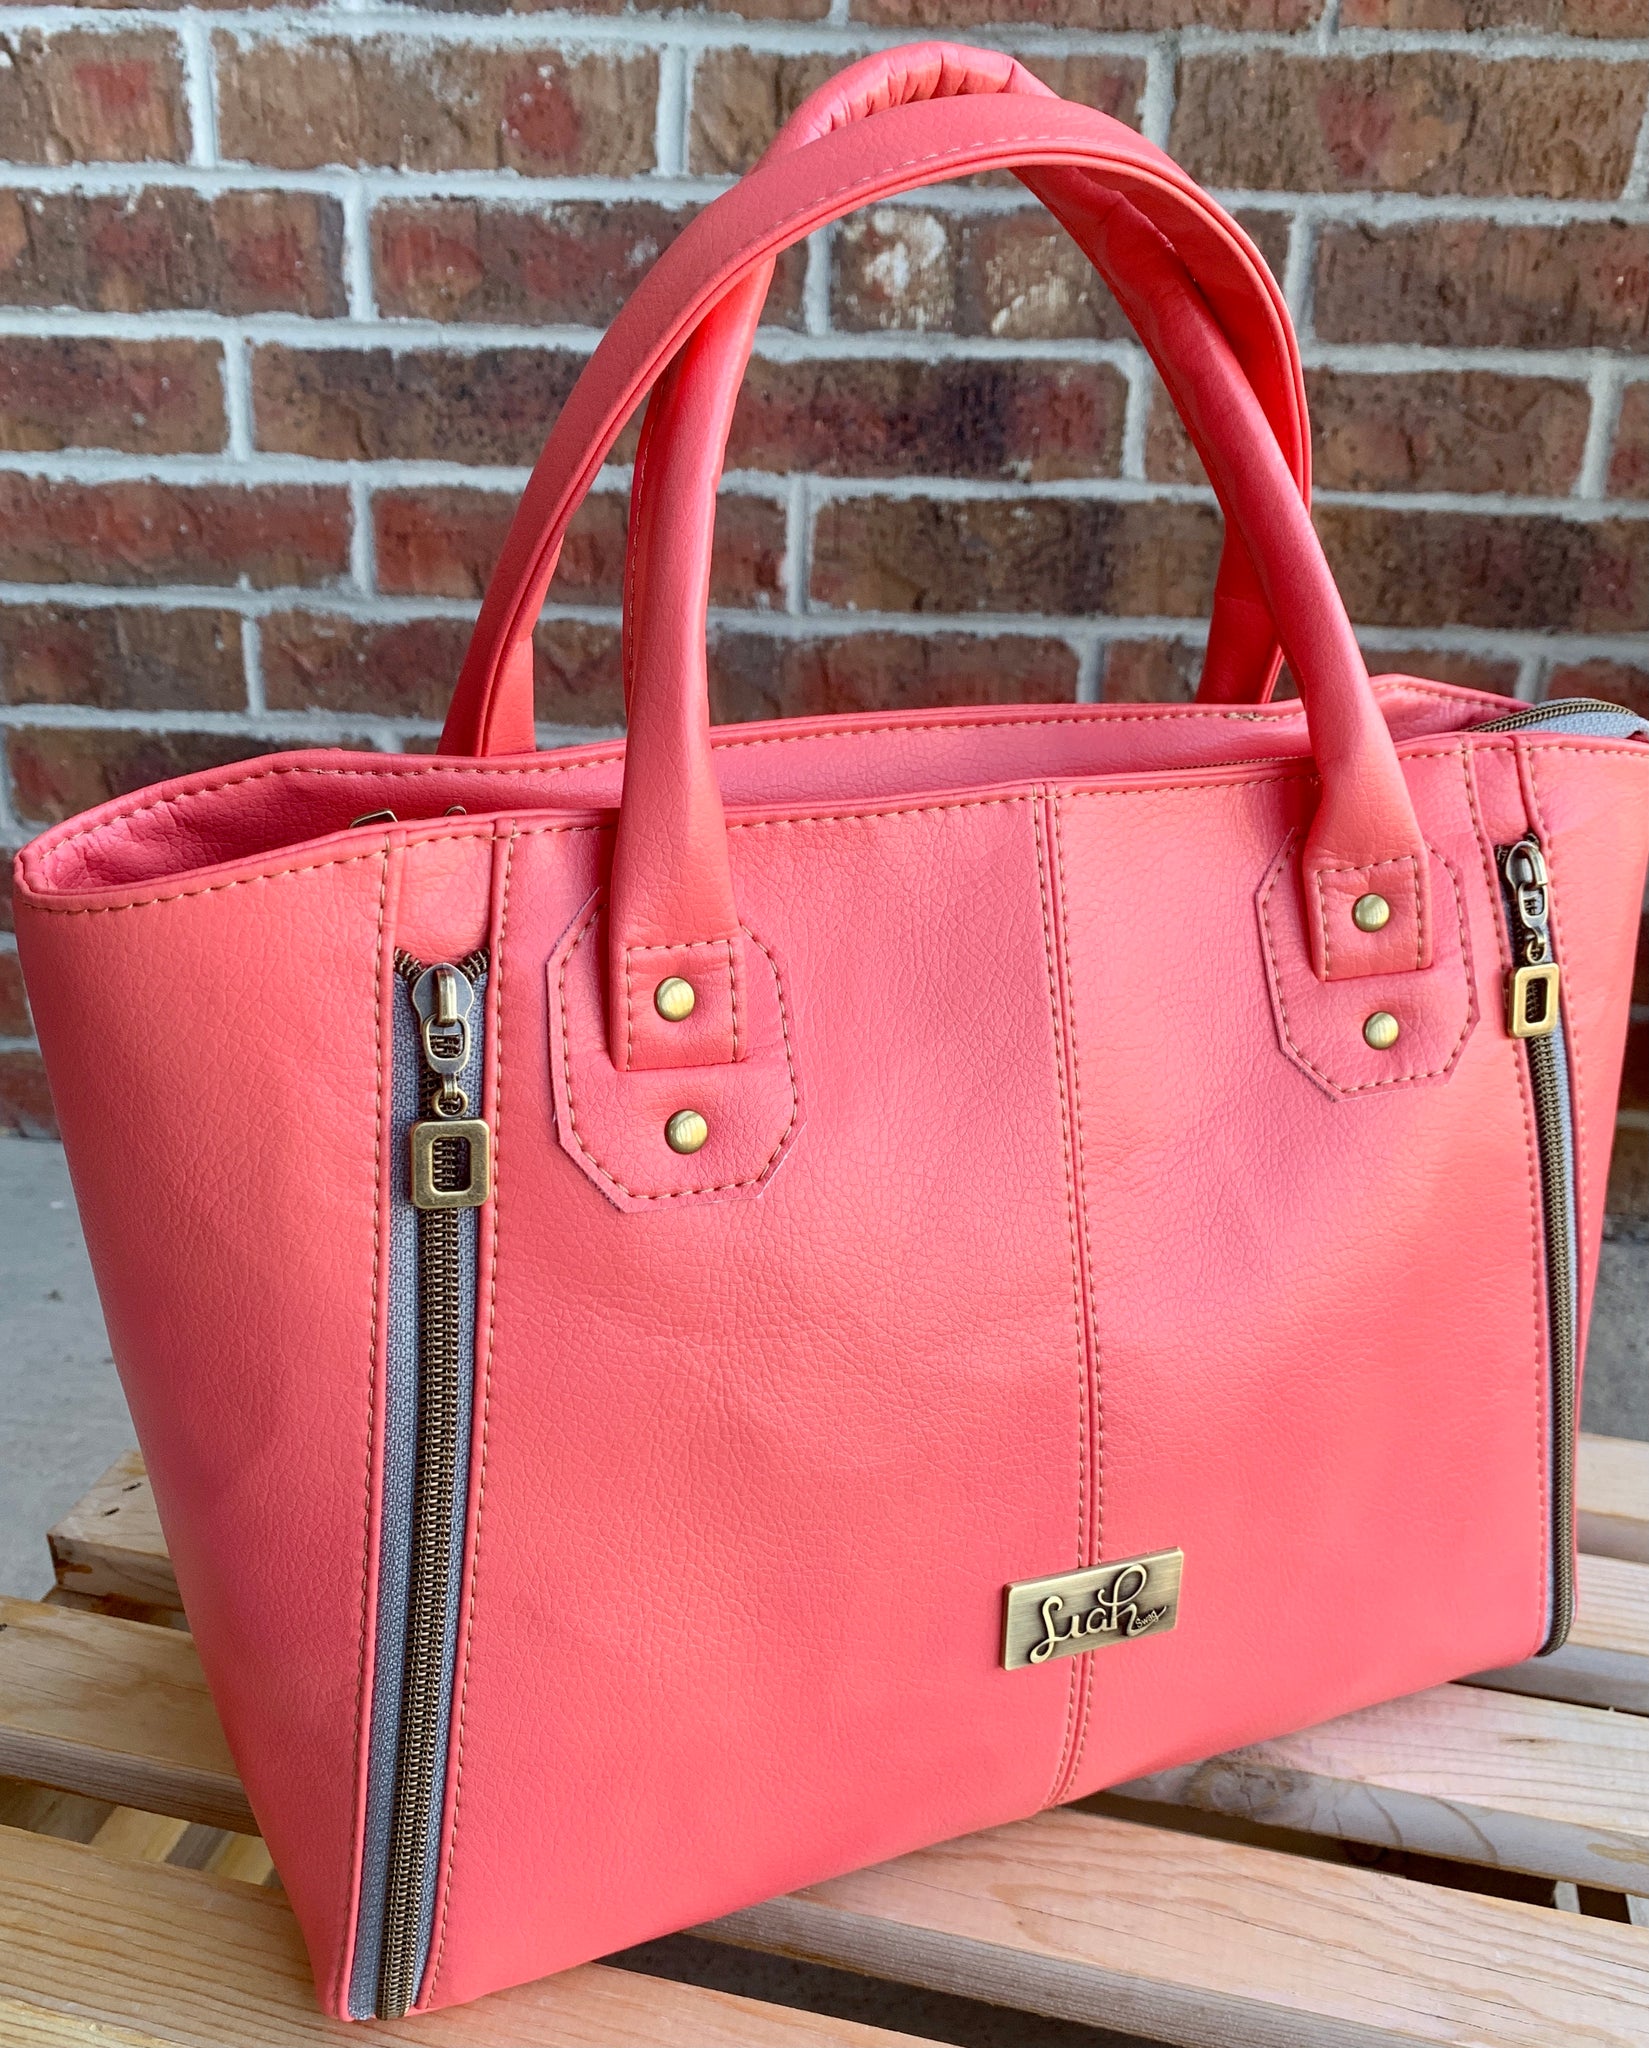 Kate Spade surprise sale 2022 has deals on wallets, purses, bags and up to  75% off for summer: Here are best items - oregonlive.com